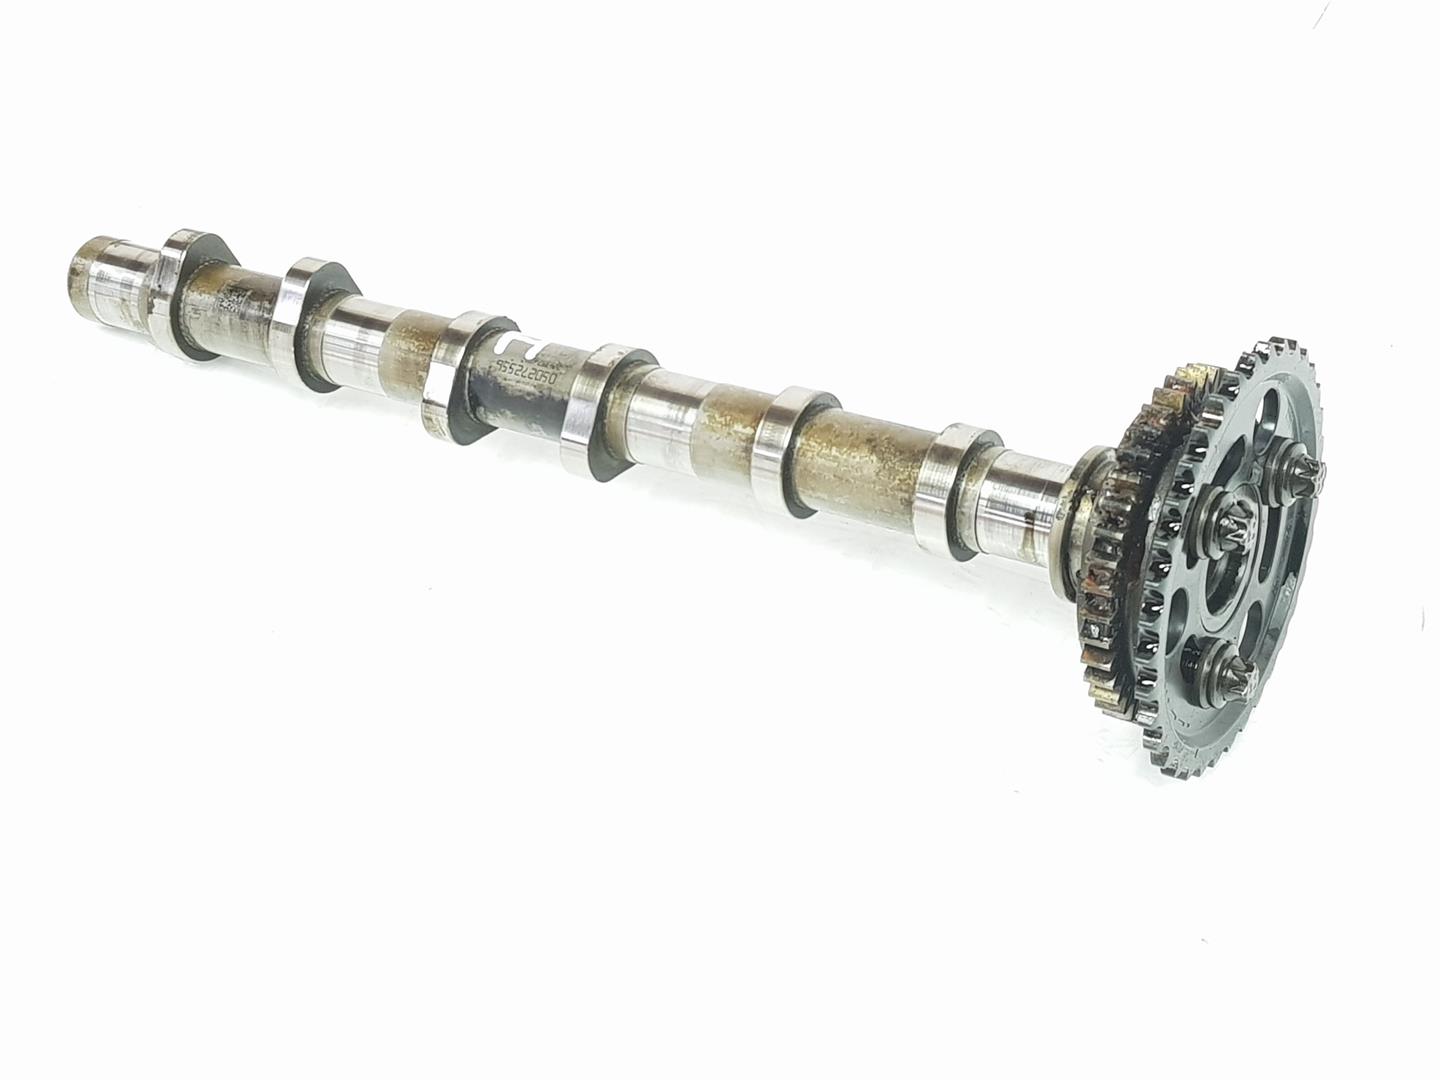 BMW 1 Series F20/F21 (2011-2020) Exhaust Camshaft 11318511208, 11318511208, ADMISION2222DL 19773075